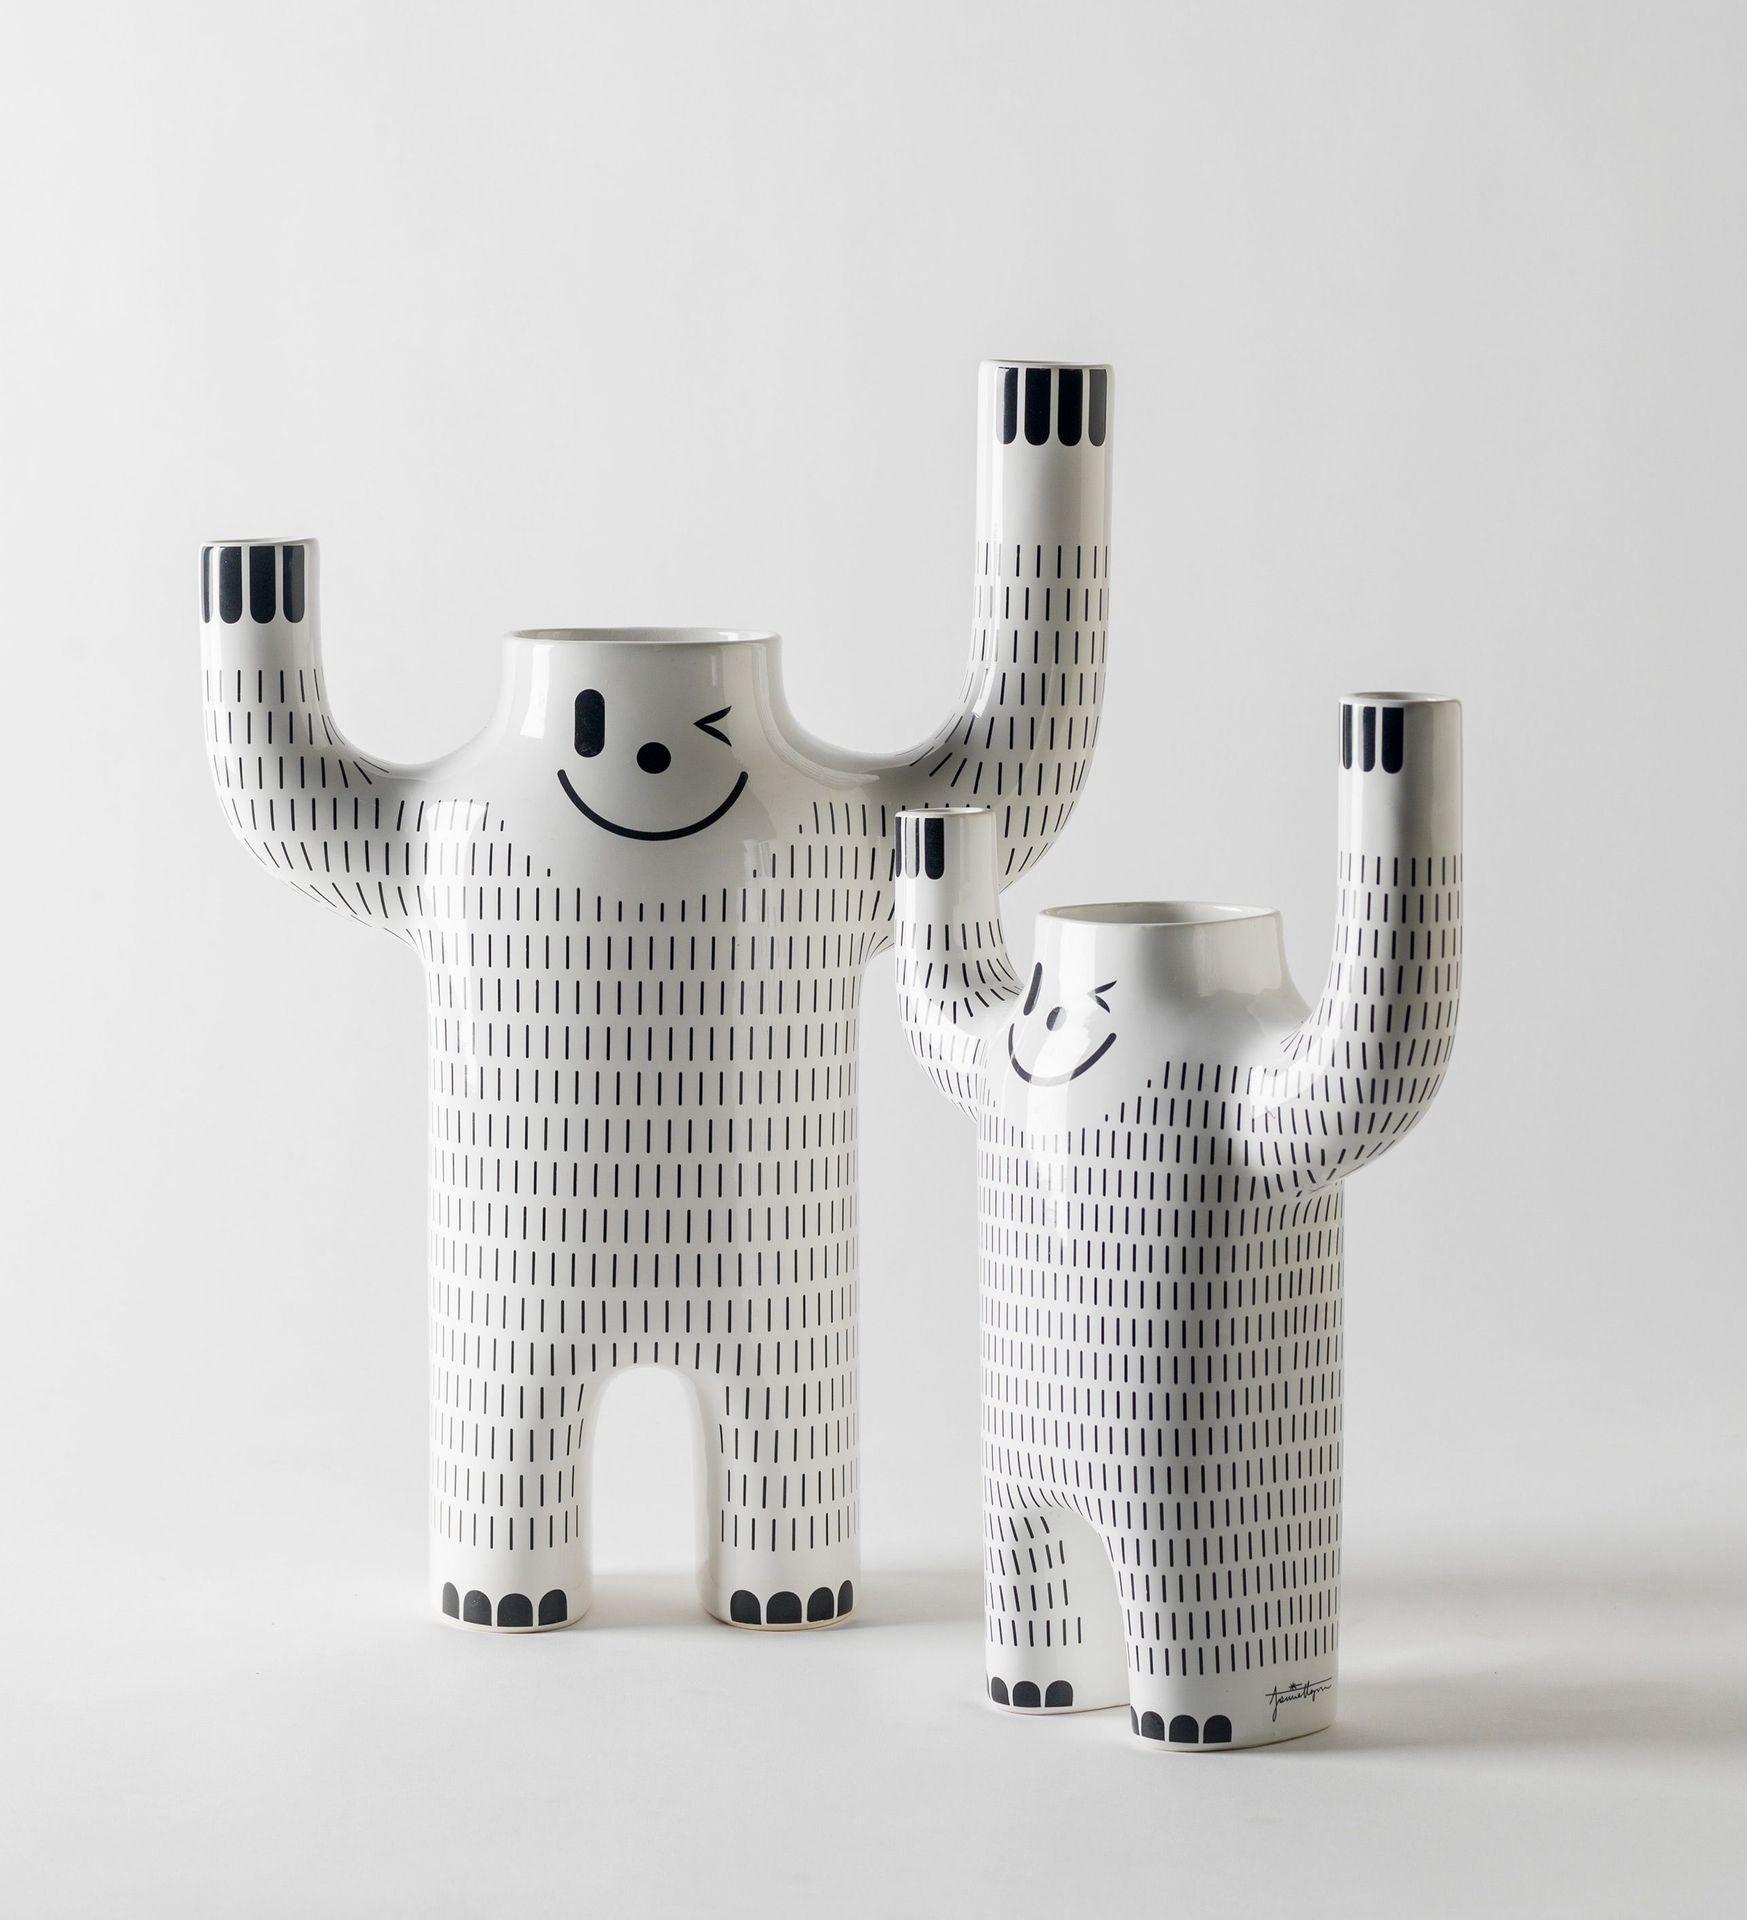 Set of Happy Yeti vases by Jaime Hayon 
Dimensions: D 14 x W 33 x H 47 cm and D10 x W24 X H34 cm
Materials: Glazed ceramic vase in white with decorations in black.

From when I was little, I always found the Yeti story funny - that snow monster